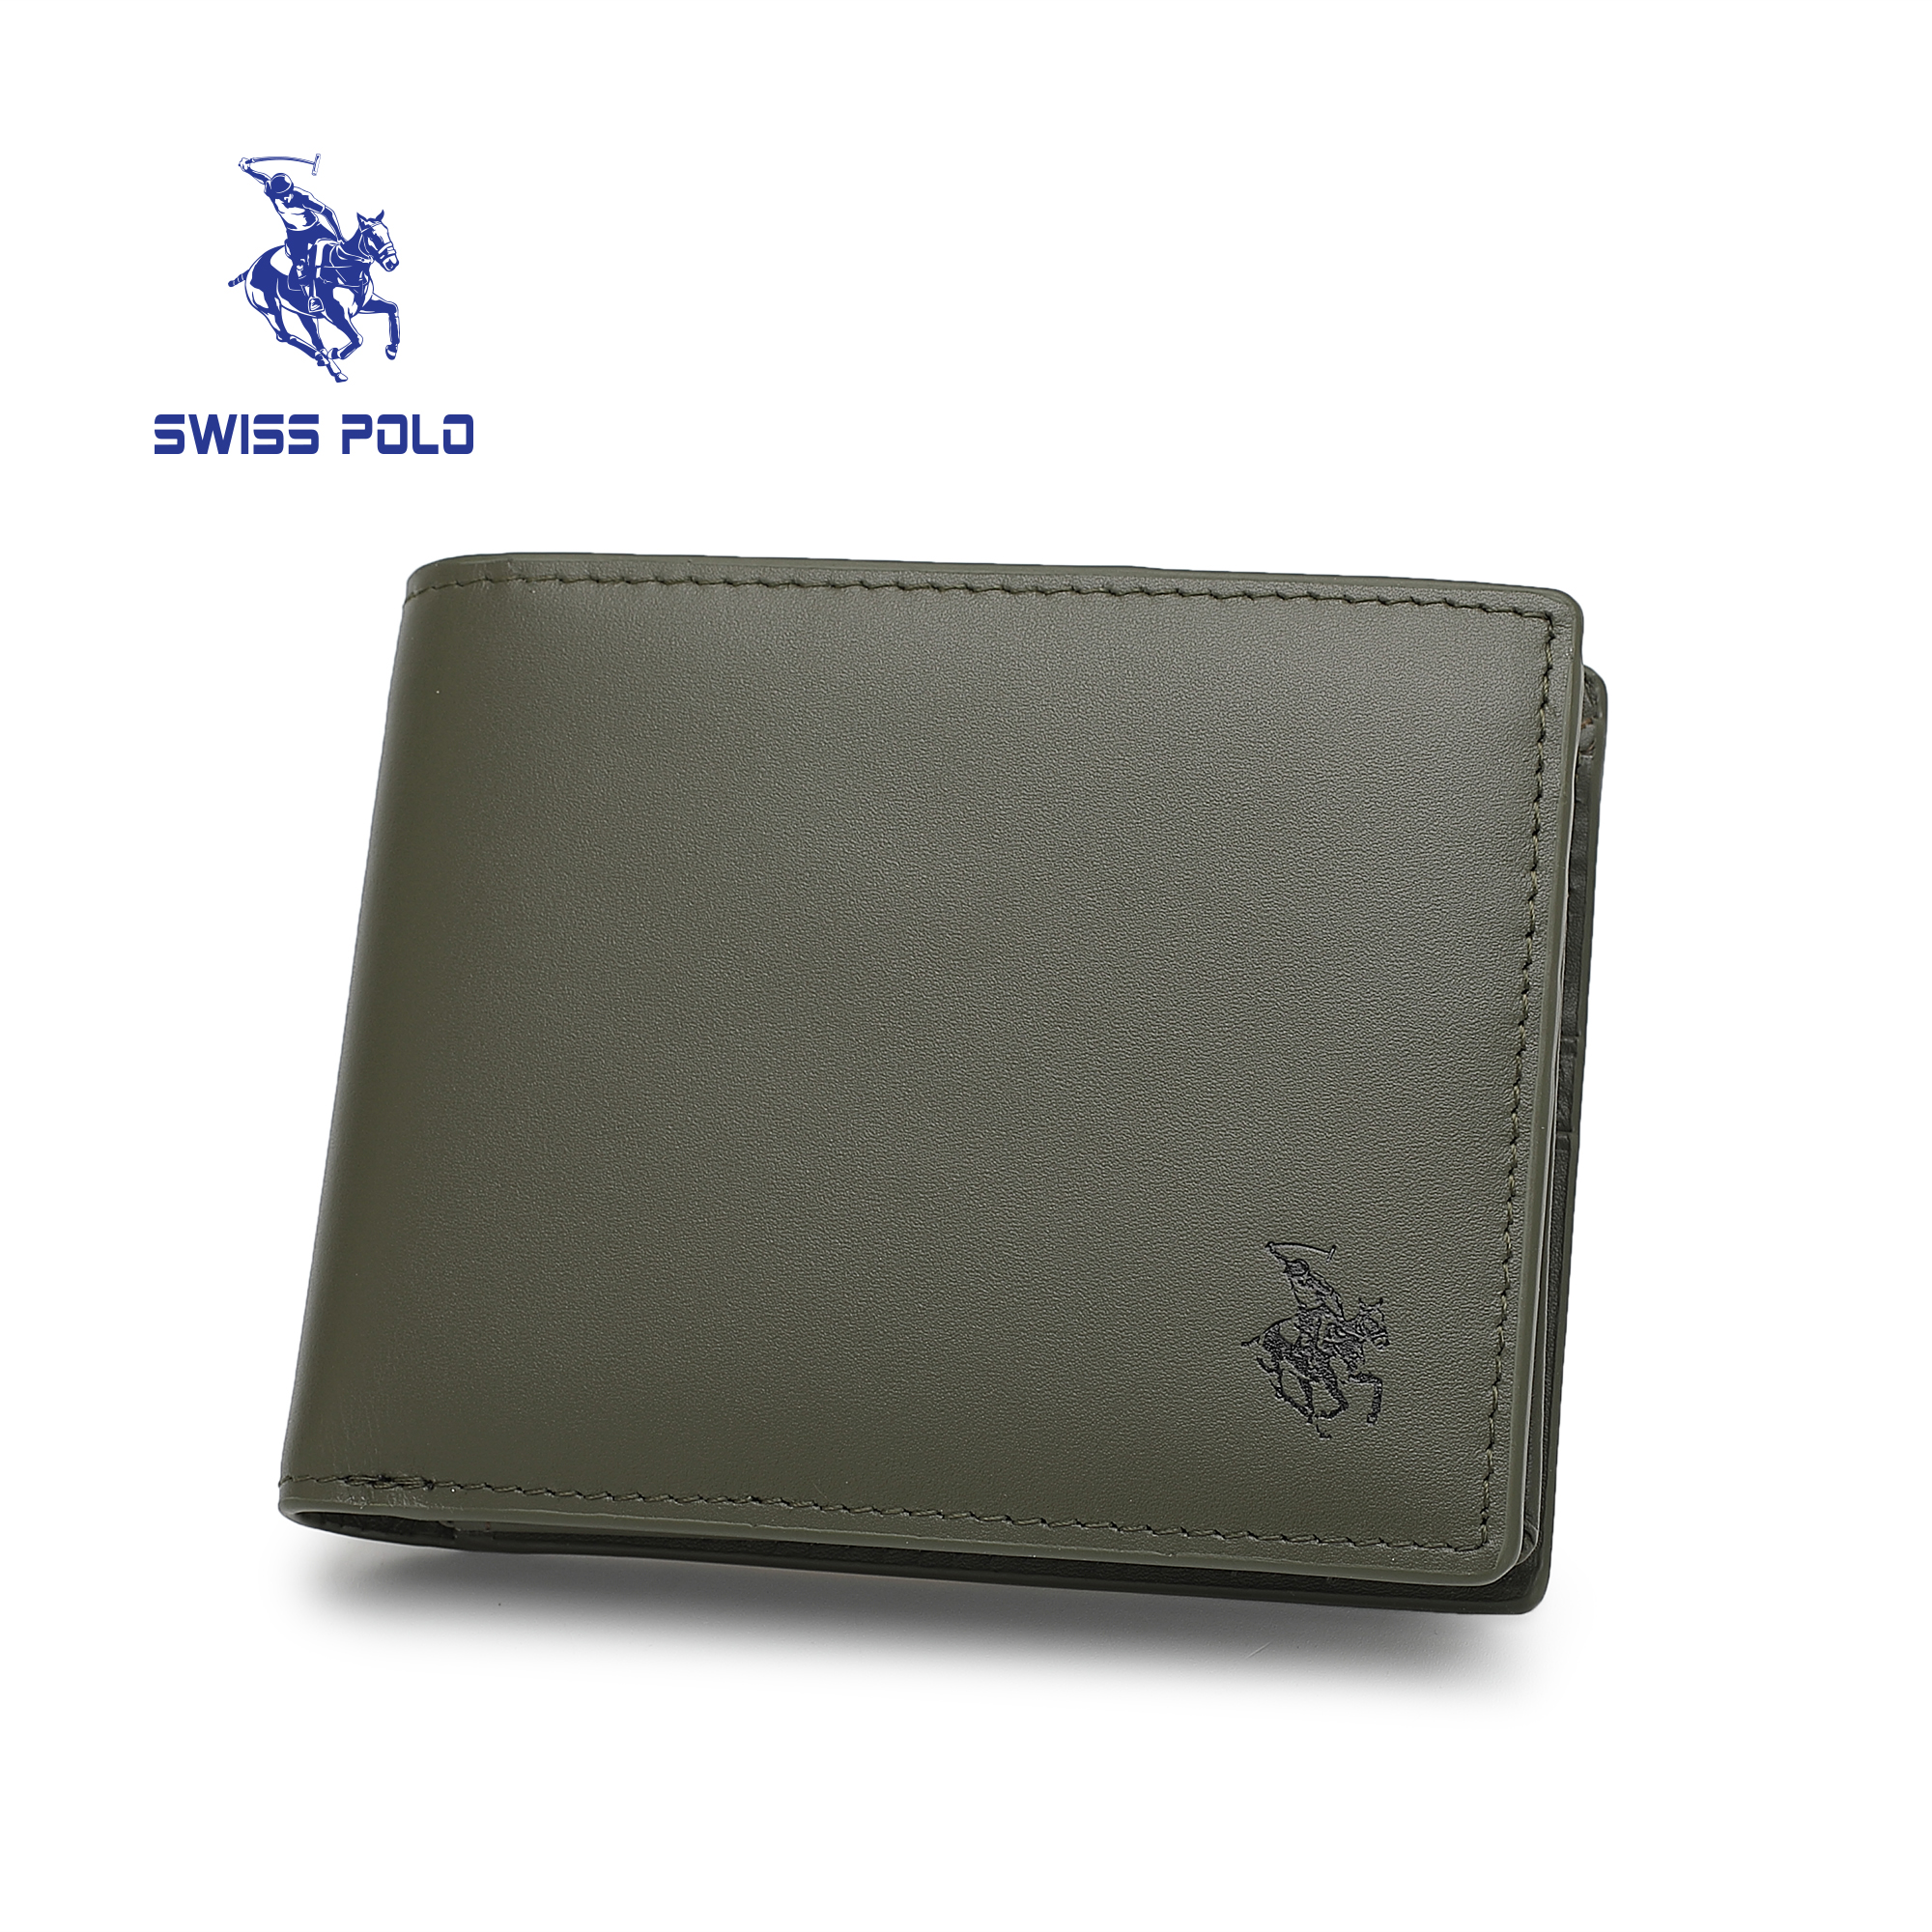 SWISS POLO Genuine Leather RFID Short Wallet SW 176-3 ARMY GREEN